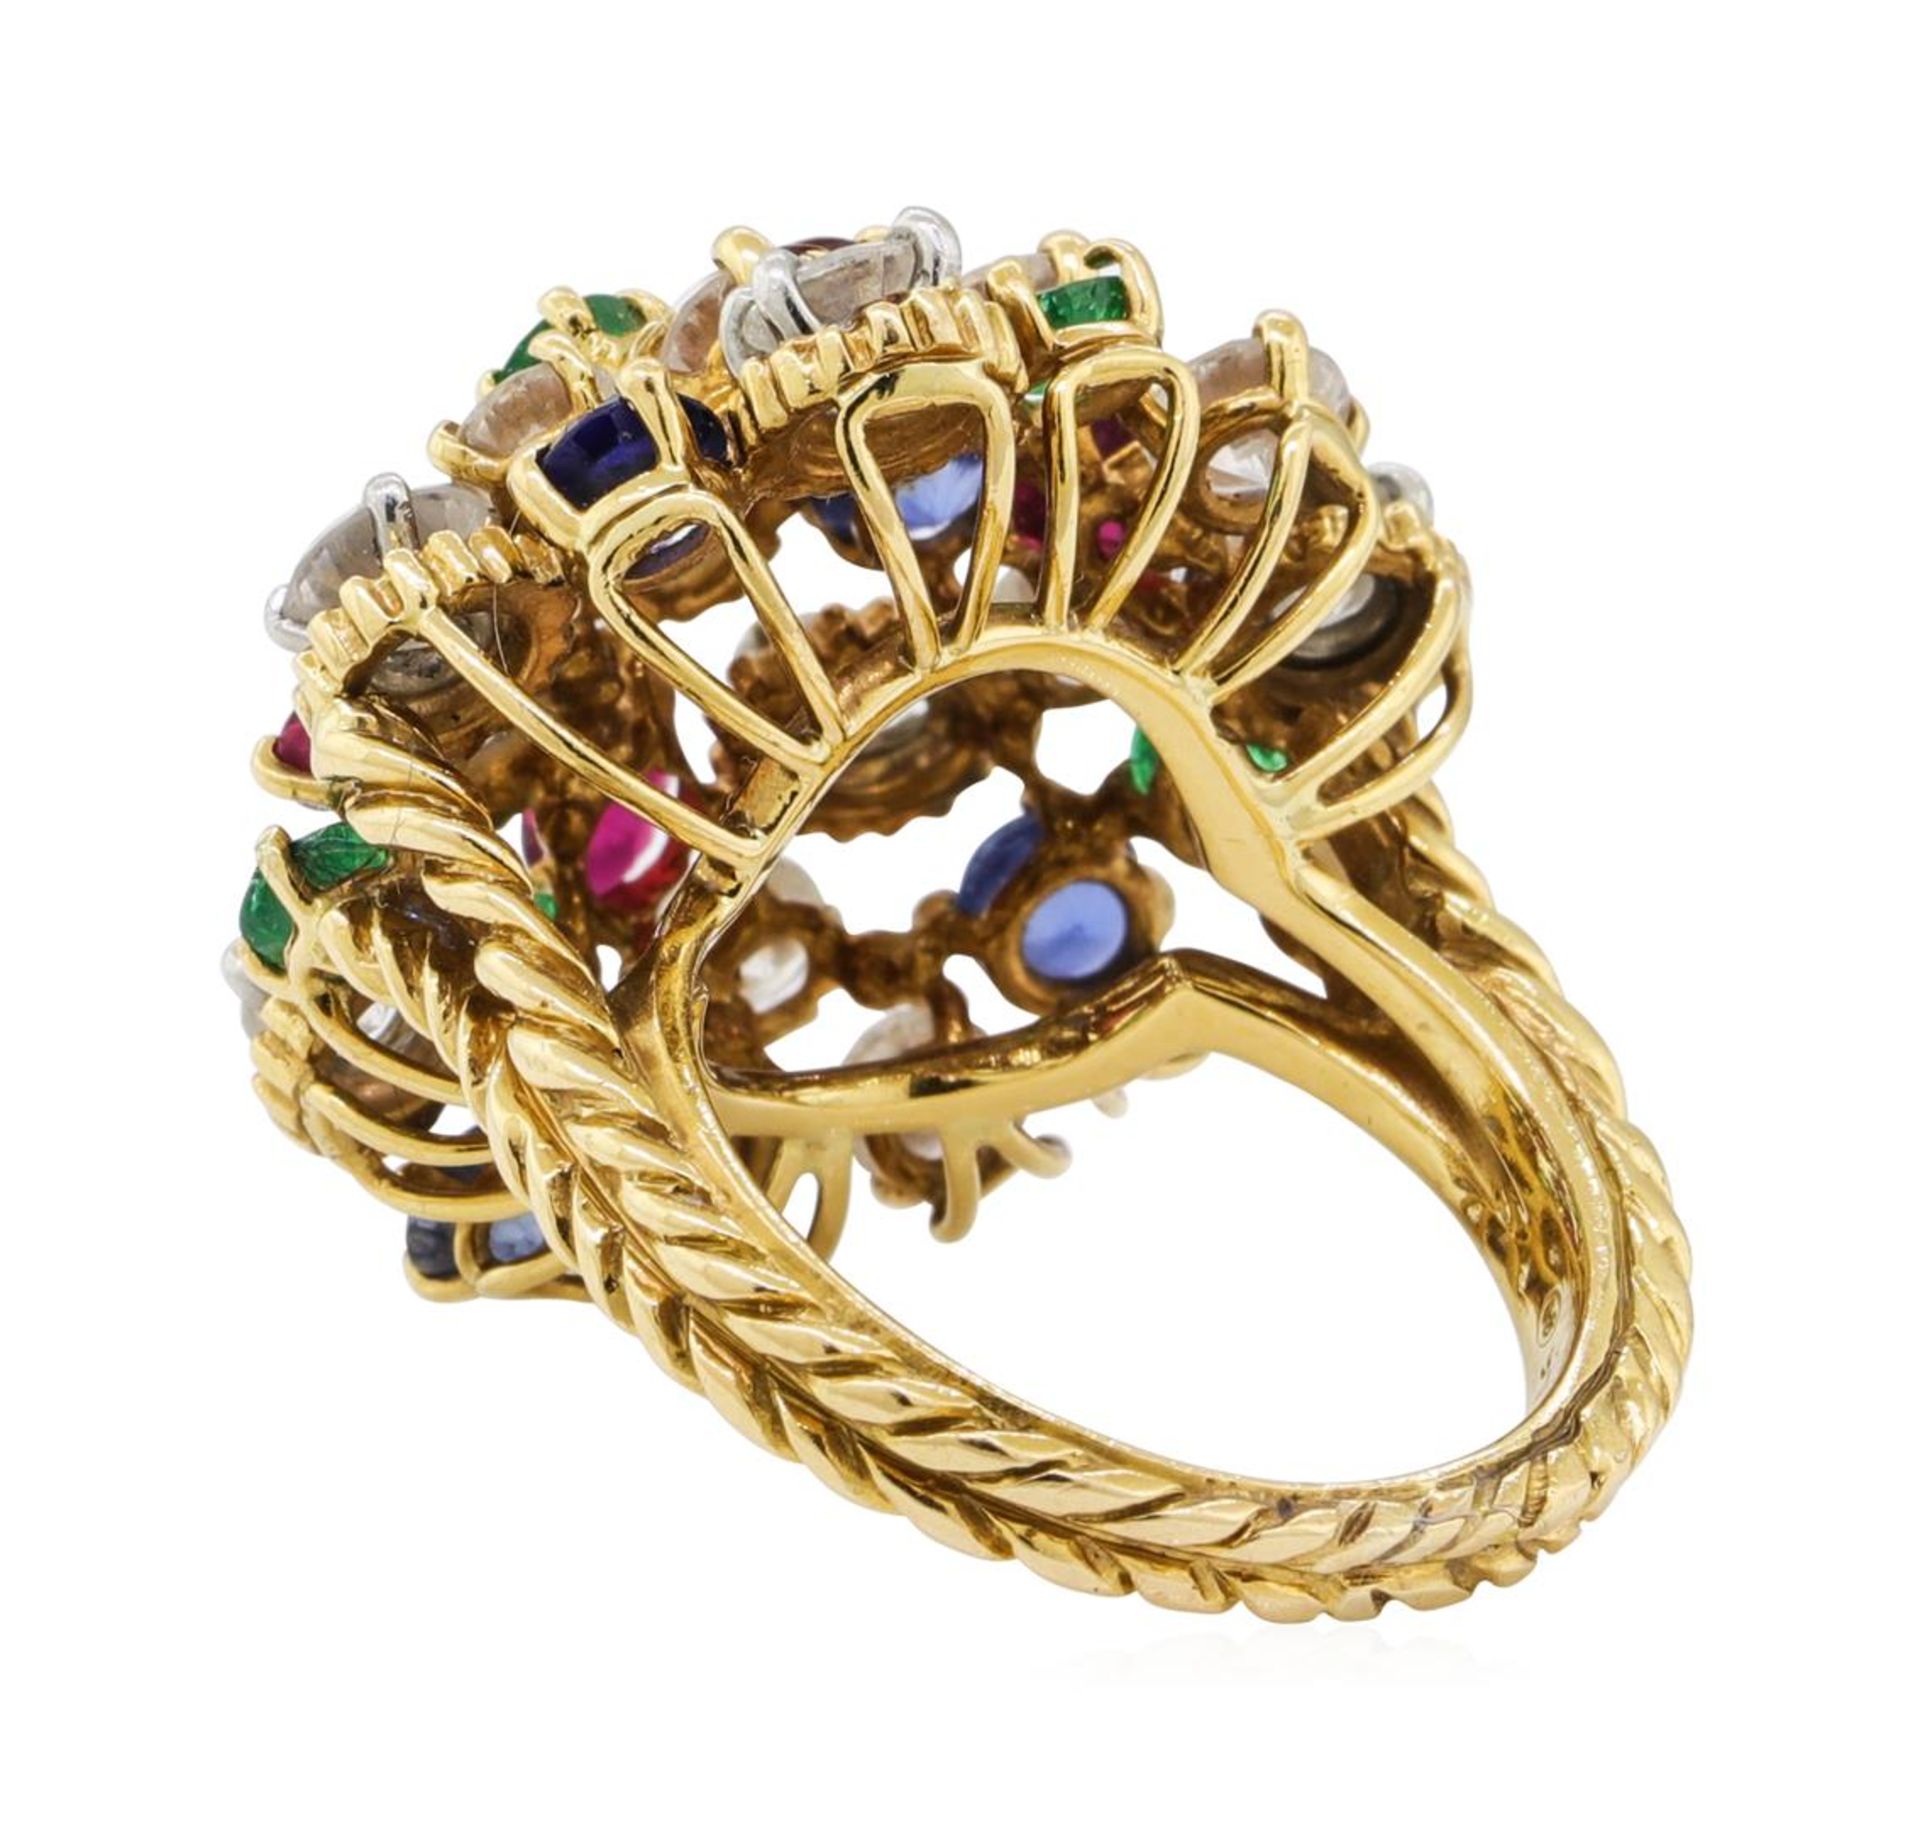 7.08 ctw Ruby, Emerald, Sapphire, and Diamond Ring - 18KT Yellow Gold and Platin - Image 3 of 6